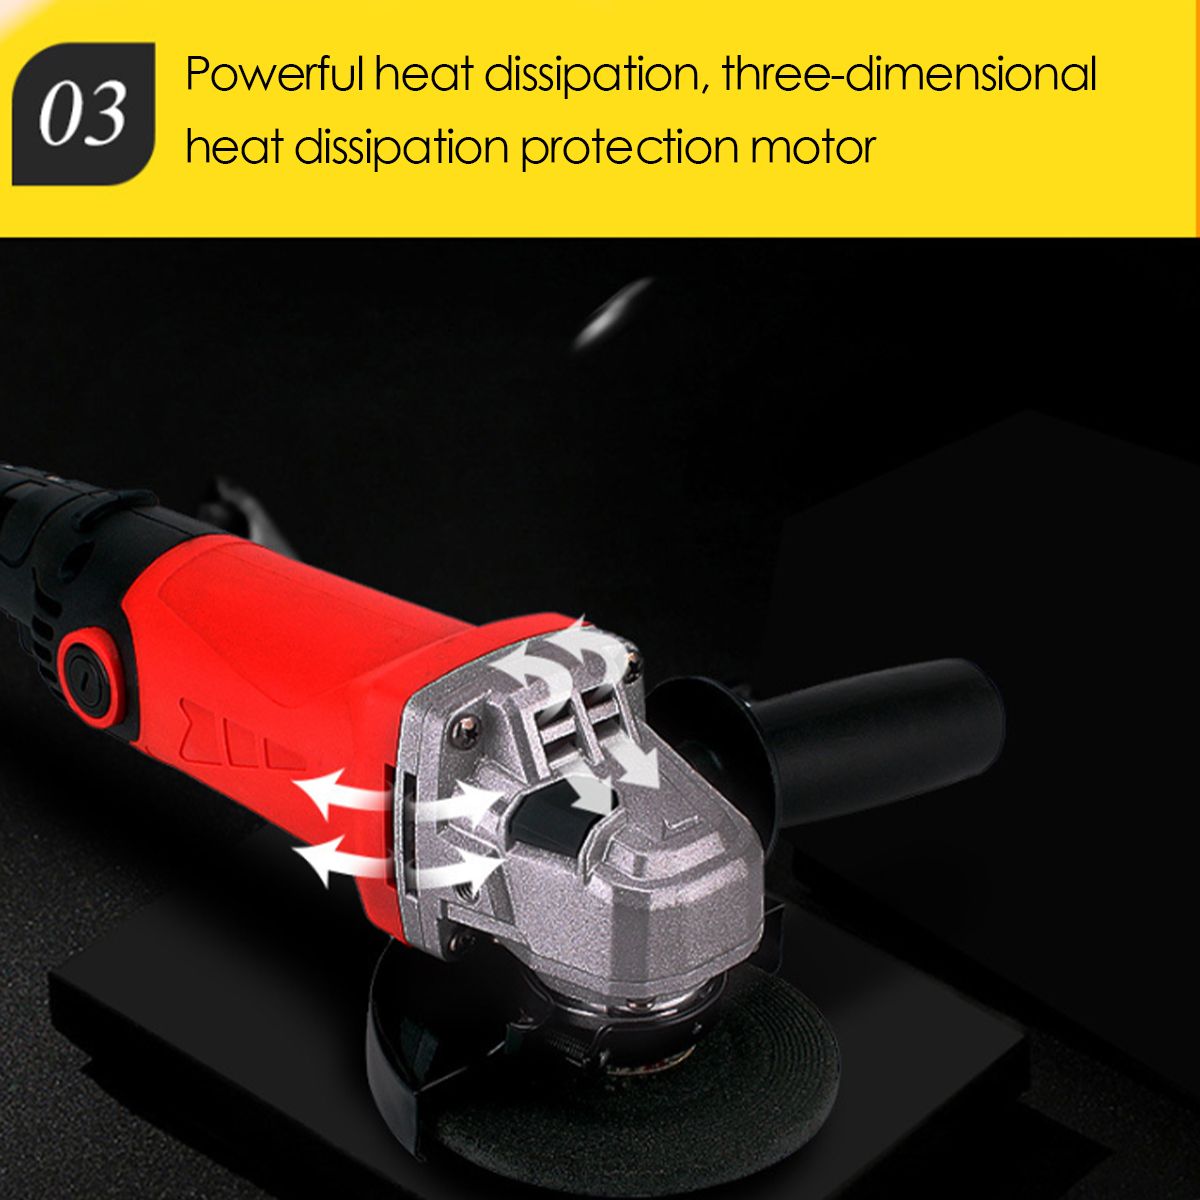 860W-Multi-purposed-Angle-Grinder-Household-Abrasive-Polisher-Cutting-Grinding-Tool-1700350